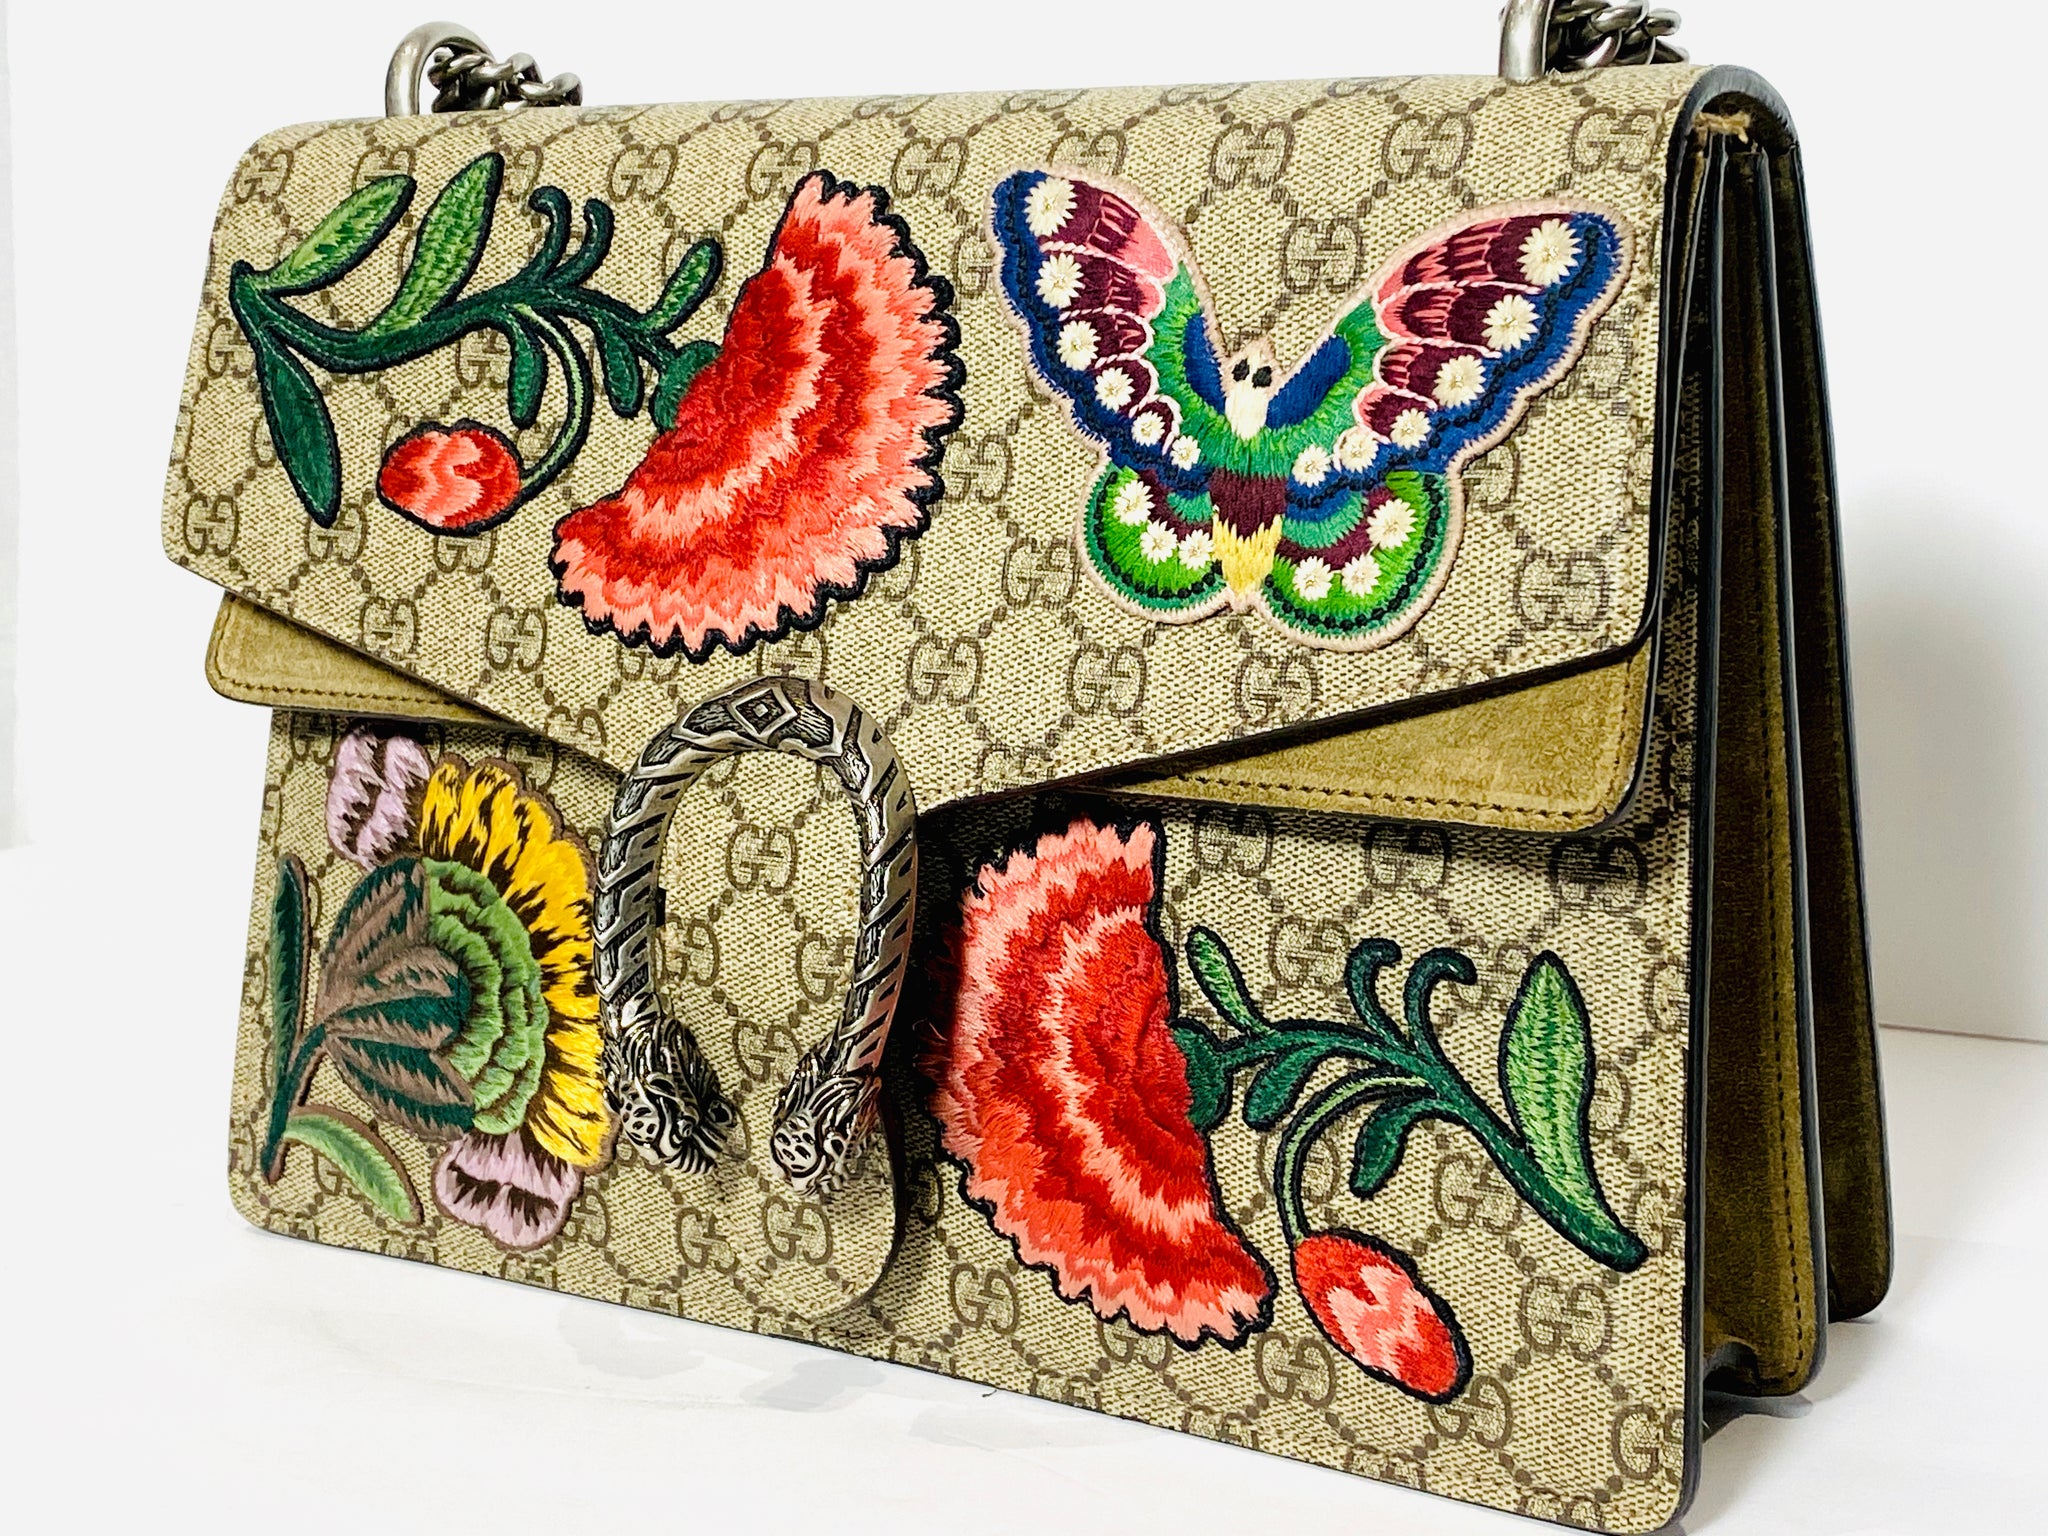 Gucci Dionysus Embroidered GG Bag